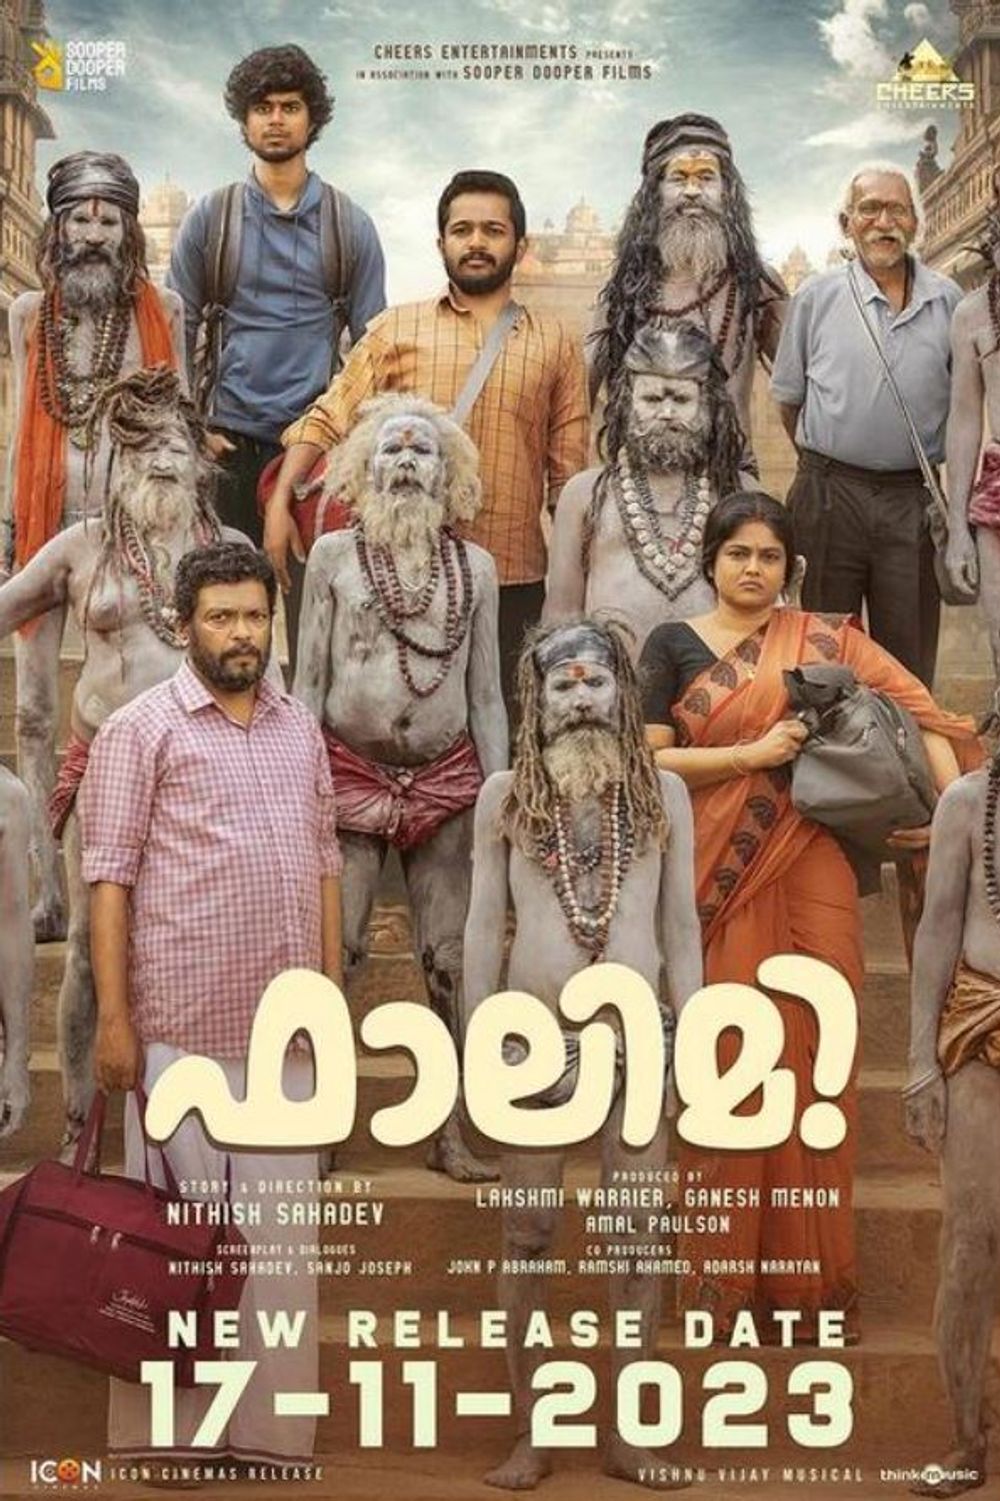 Falimy Movie Review